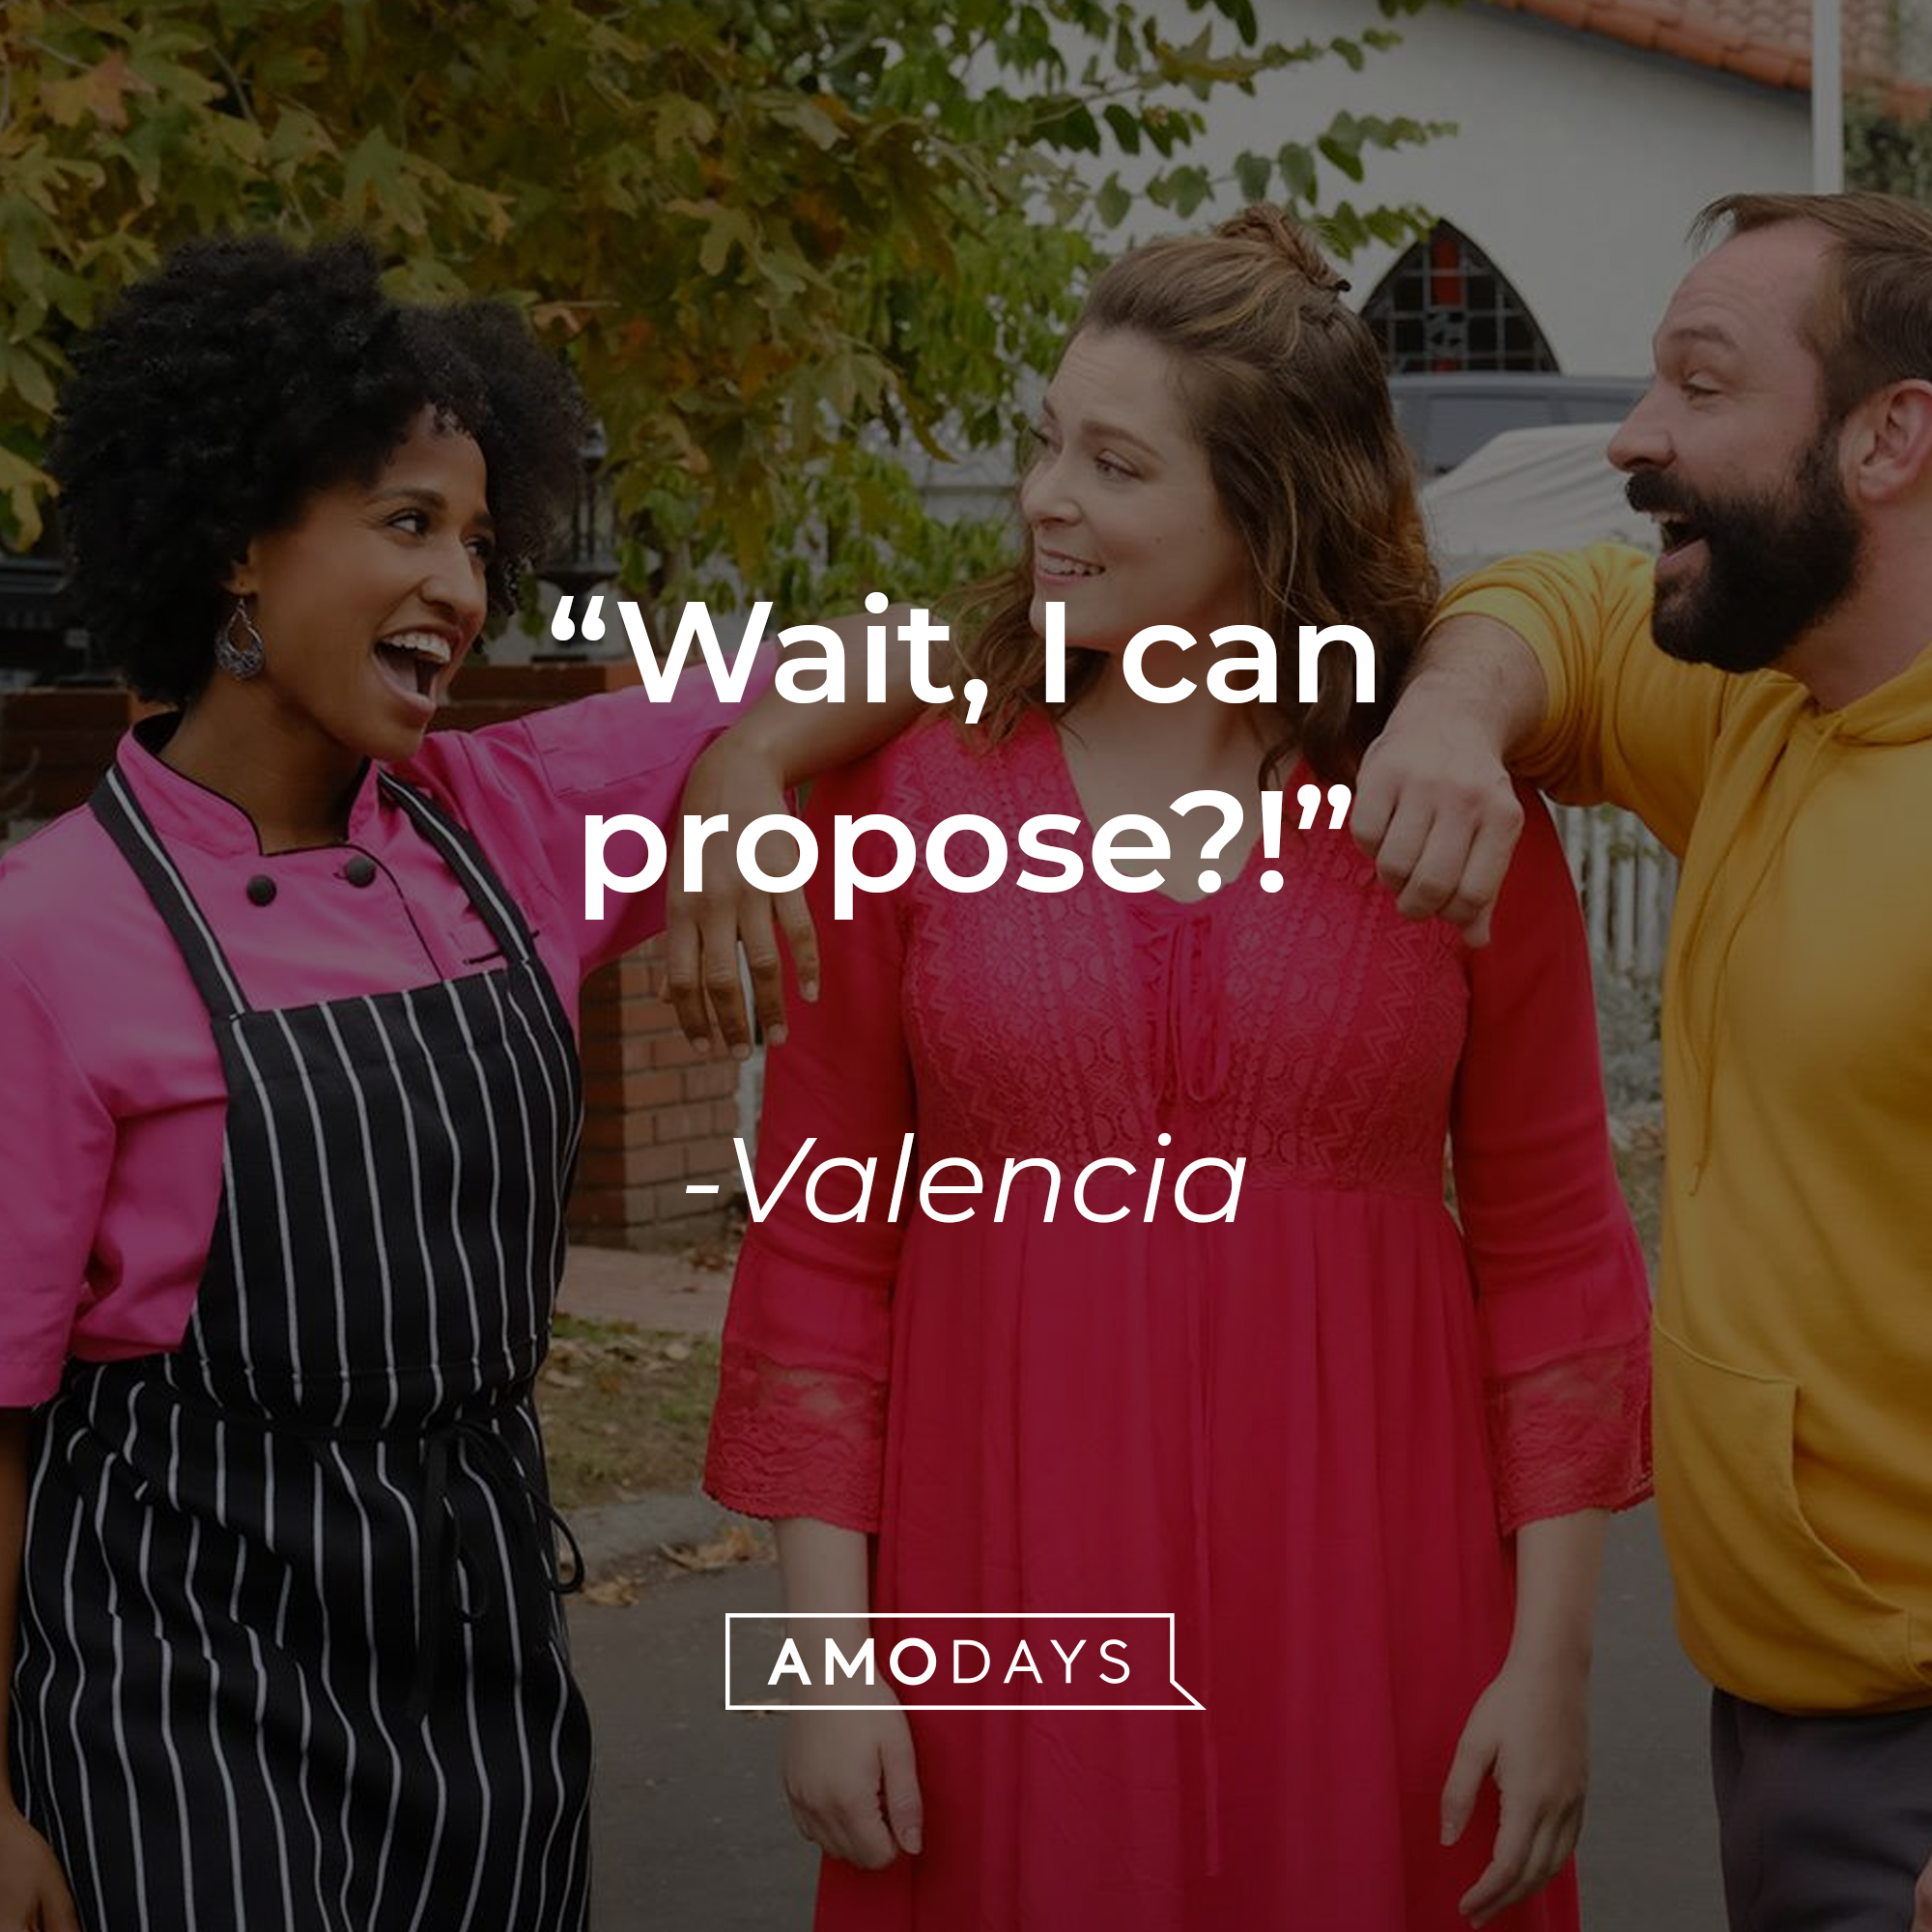 Rebecca and two other character’s with Valencia’s quote: “Wait, I can propose?!” | Source: facebook.com/crazyxgf